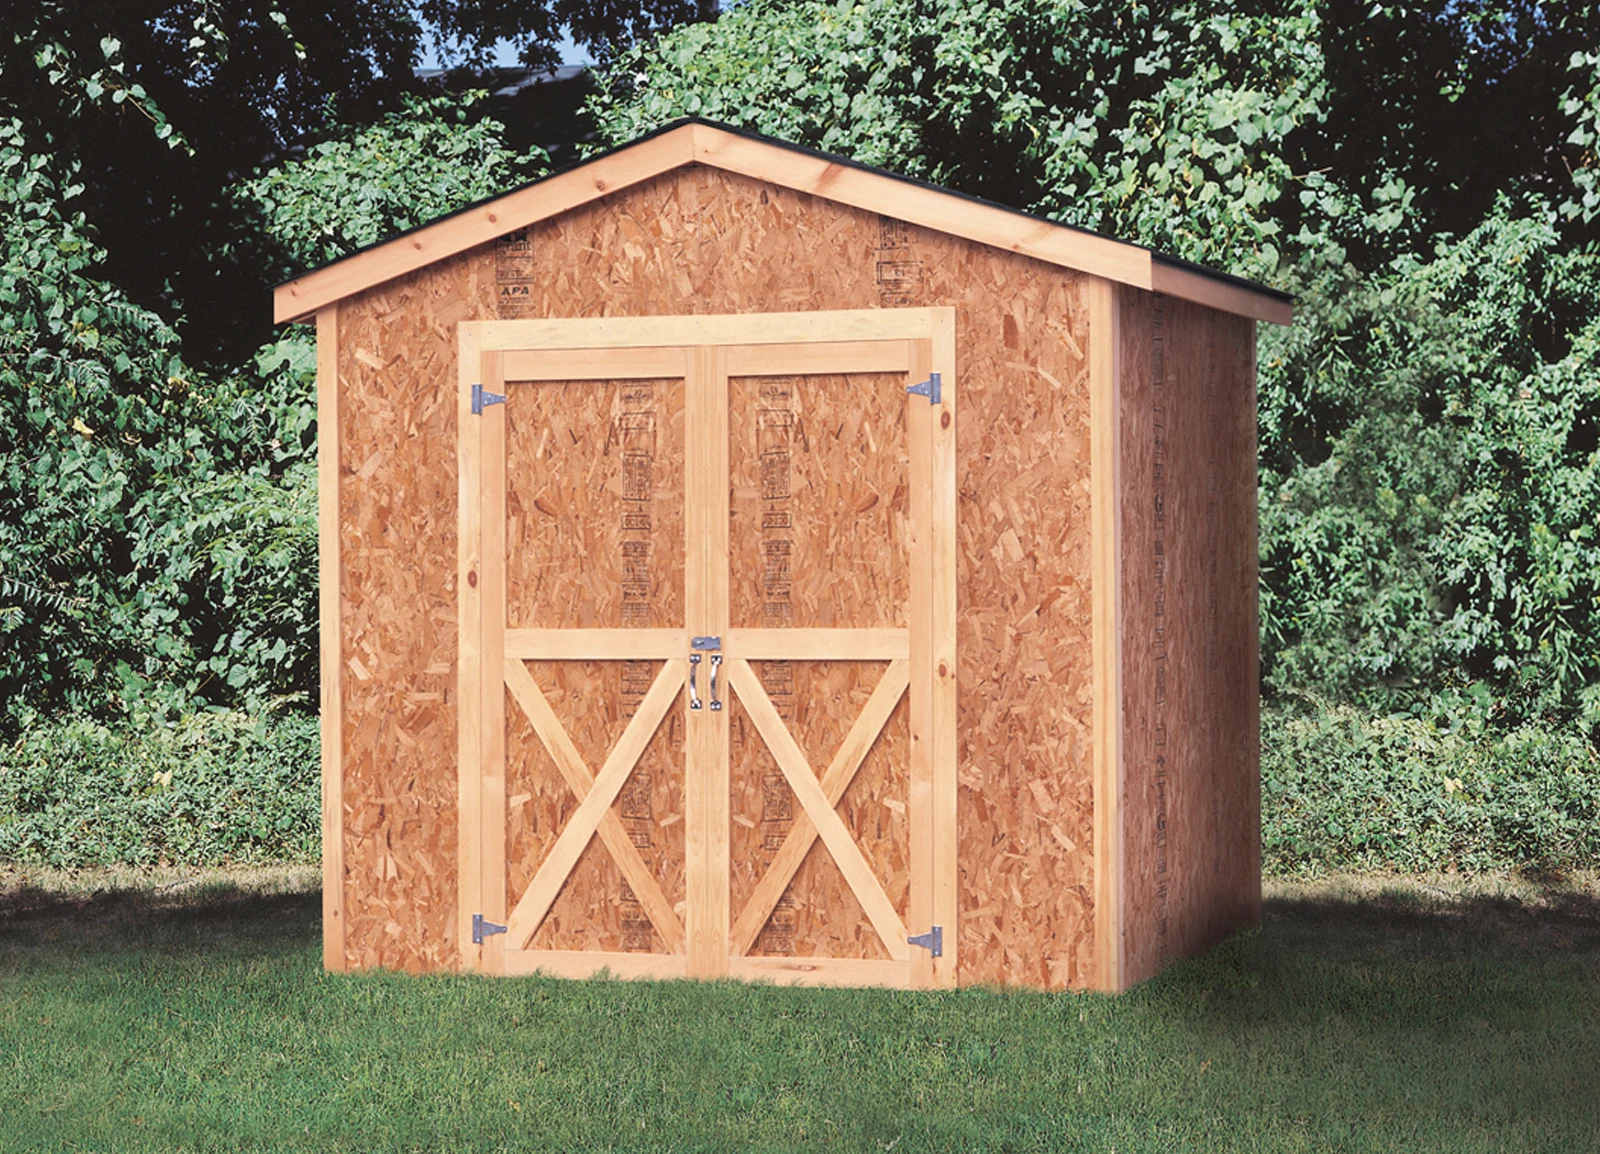 A gable shed